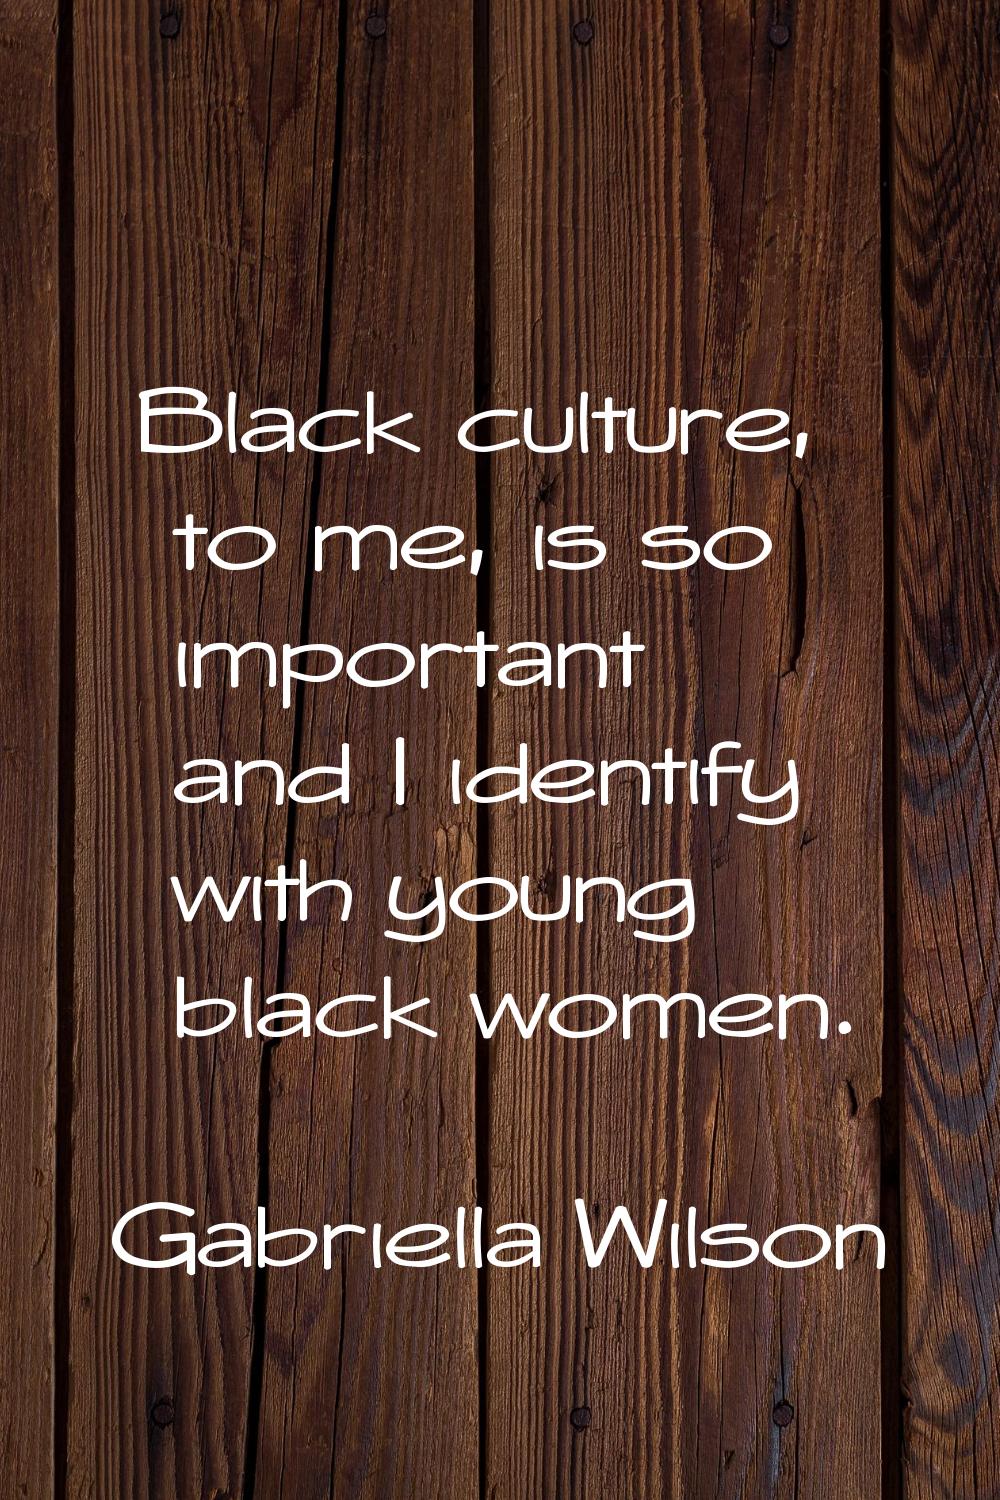 Black culture, to me, is so important and I identify with young black women.